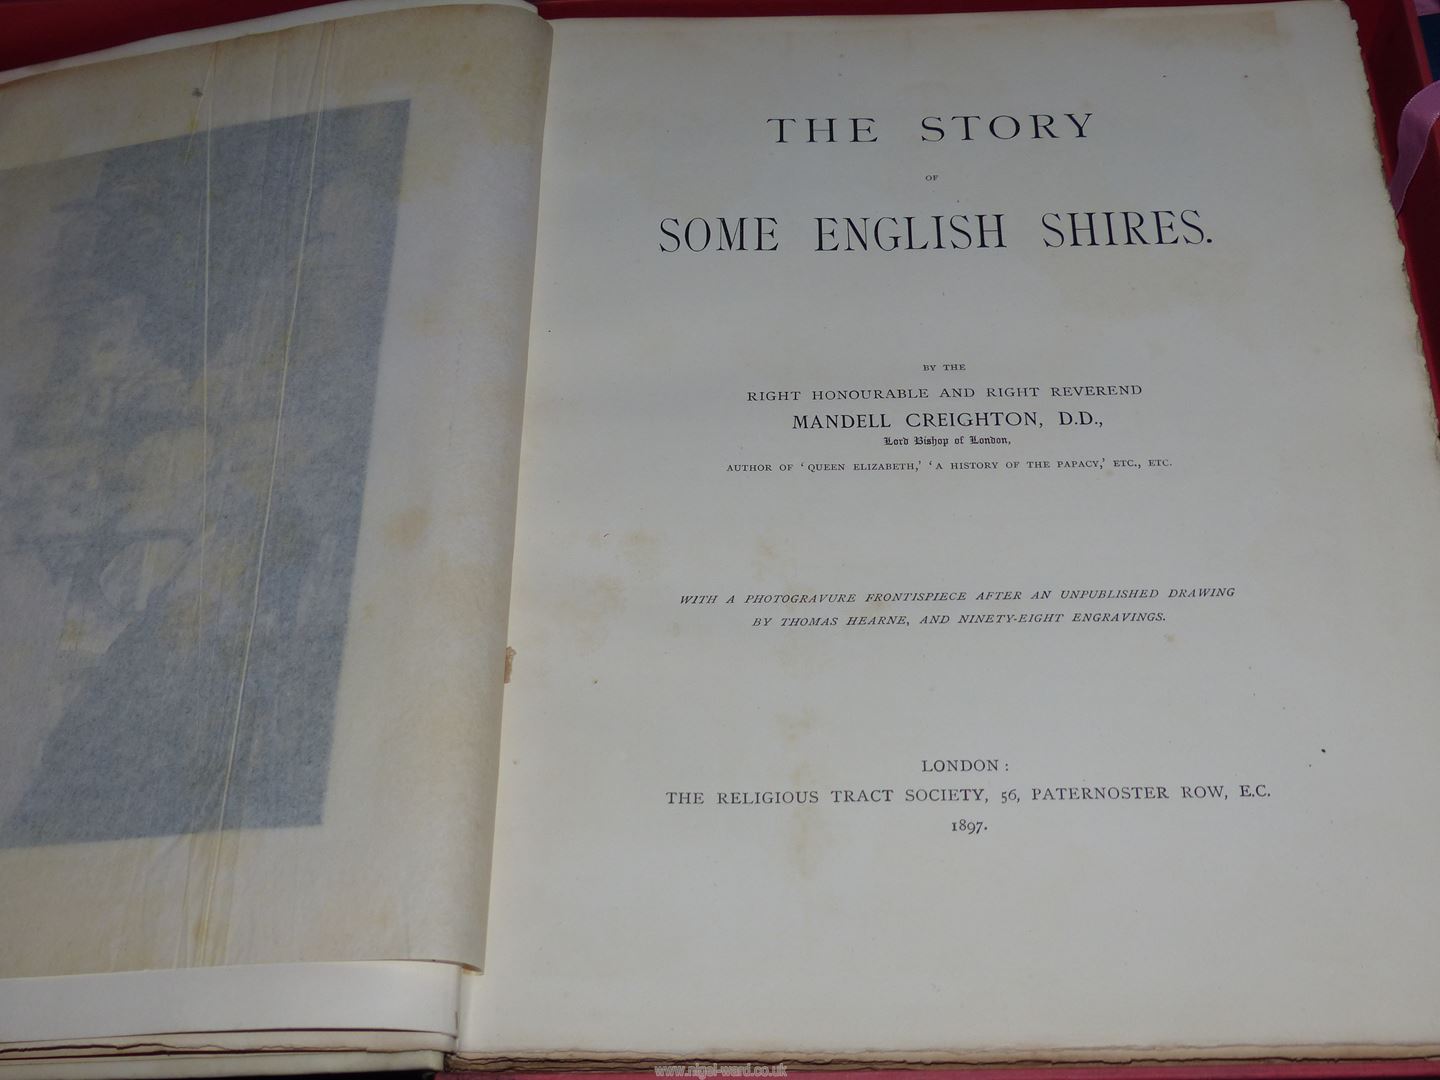 A boxed copy of The Story of Some English Shires by Mandell Creighton D.D. - Image 4 of 5